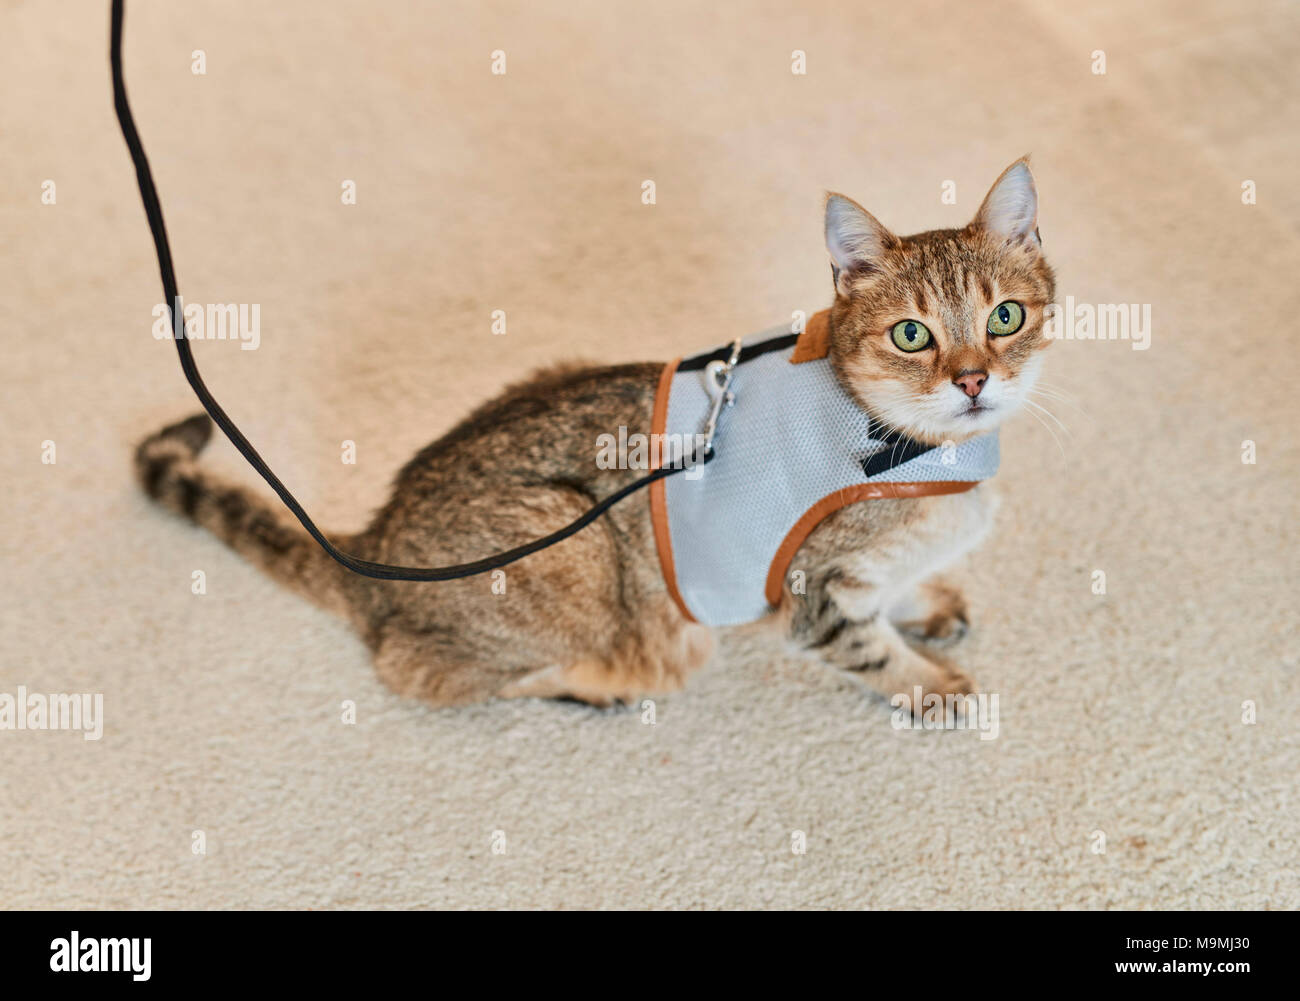 Domestic cat. Tabby adult with harness and lead. Germany. Stock Photo